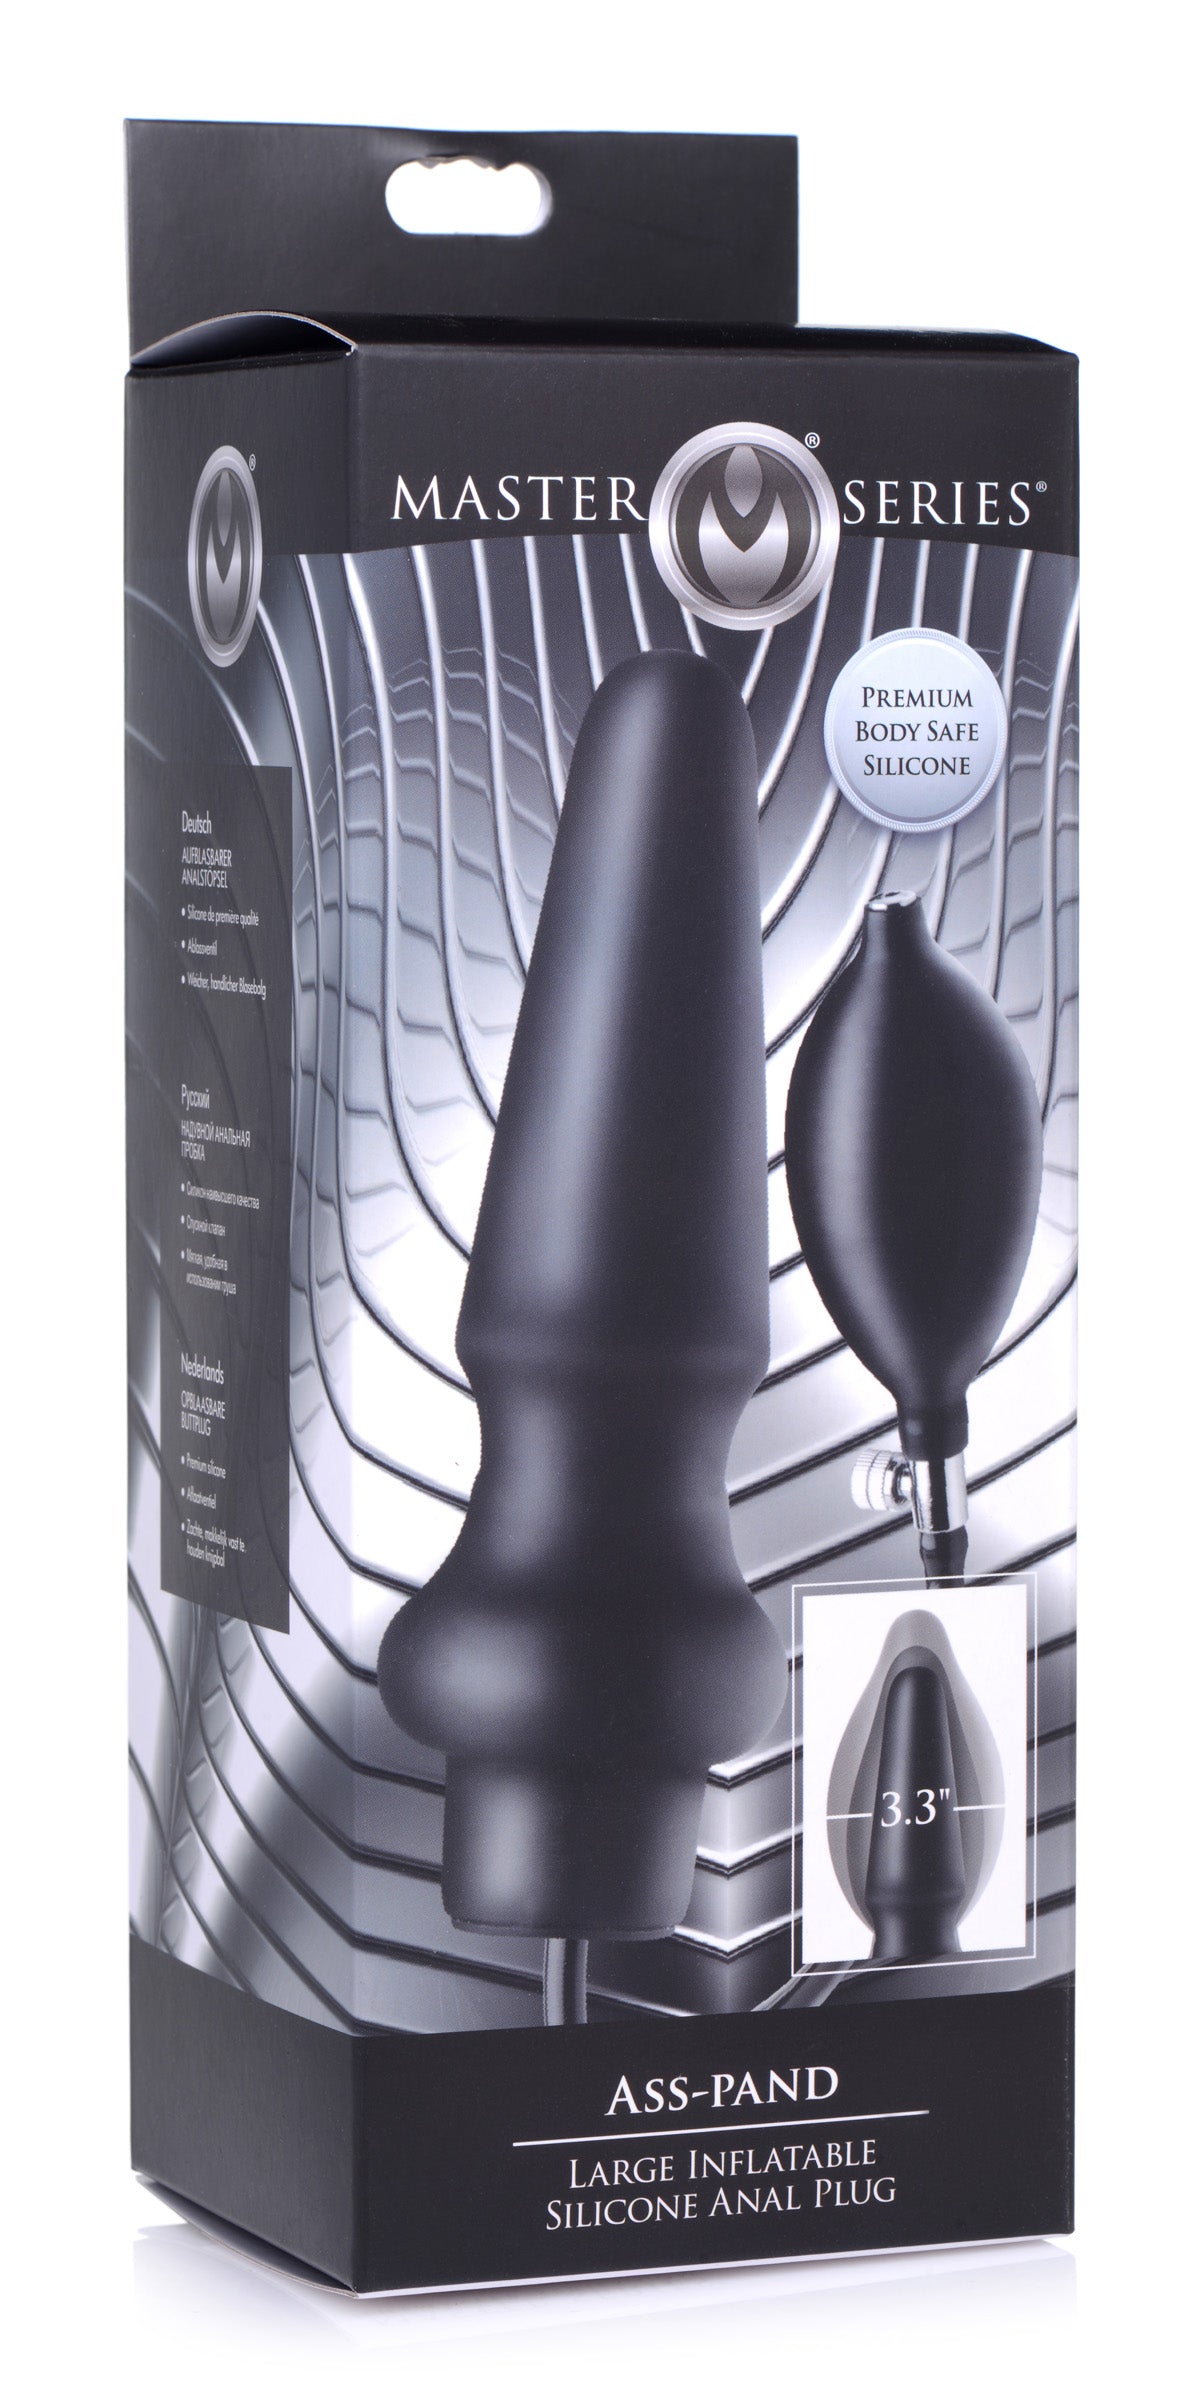 Ass-Pand Large Inflatable Silicone Anal Plug - UABDSM